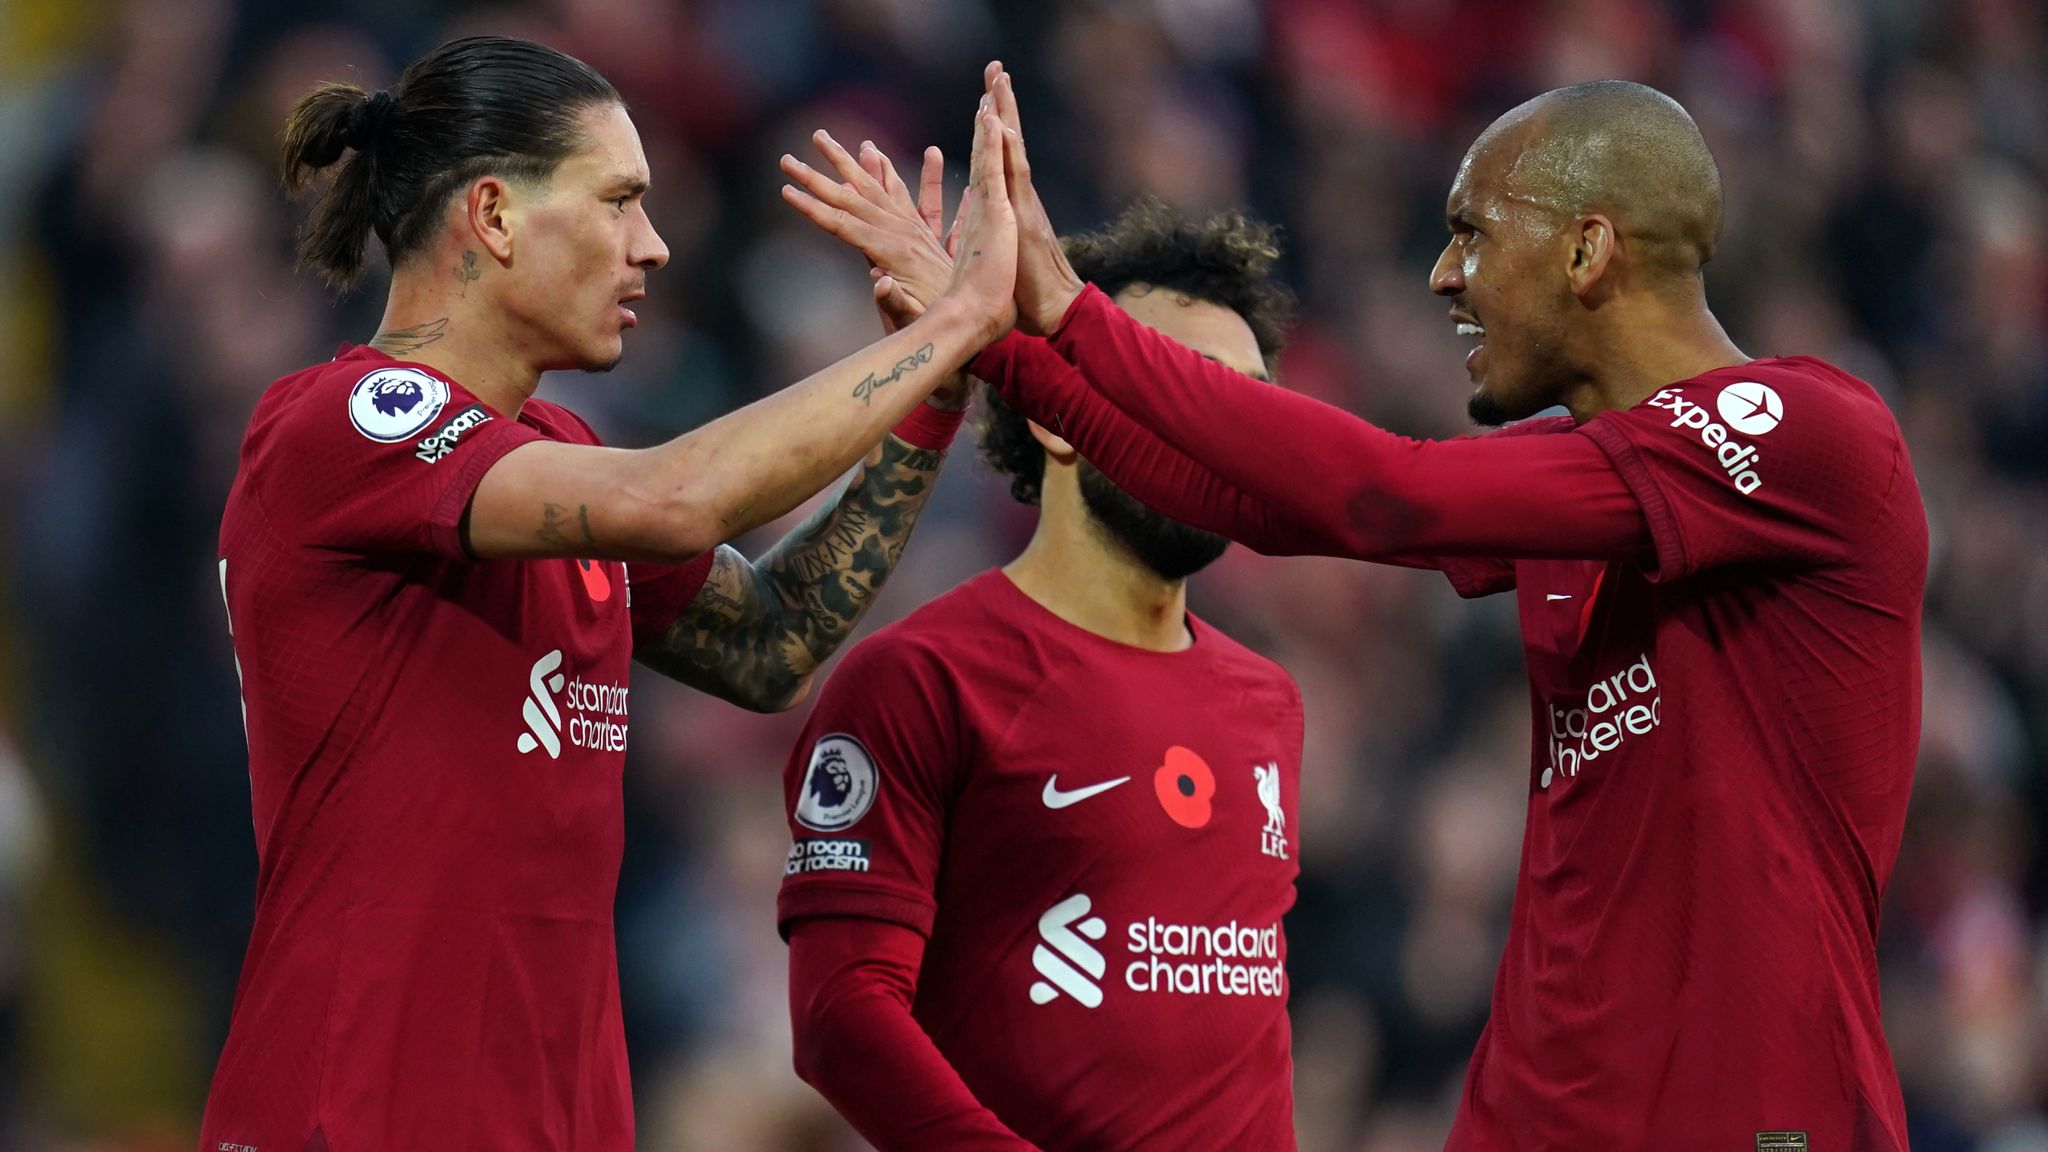 Liverpool 3 - 1 So'ton - Match Report & Highlights